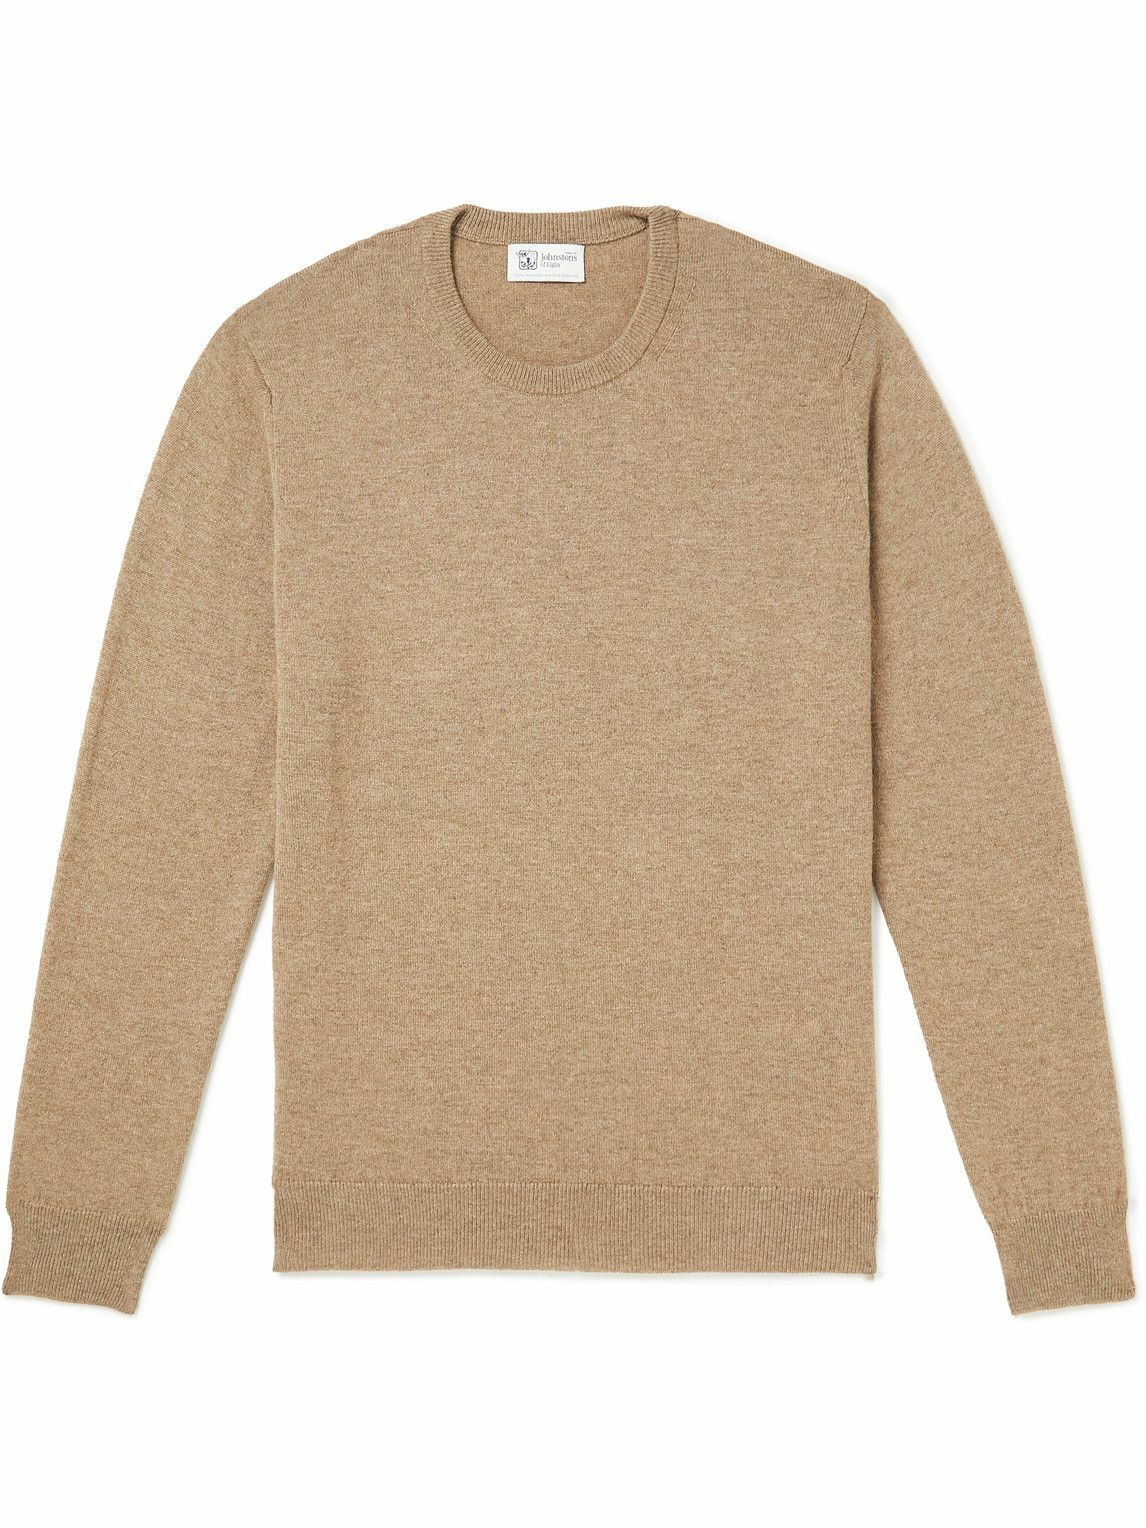 Photo: Johnstons of Elgin - Cashmere Sweater - Brown